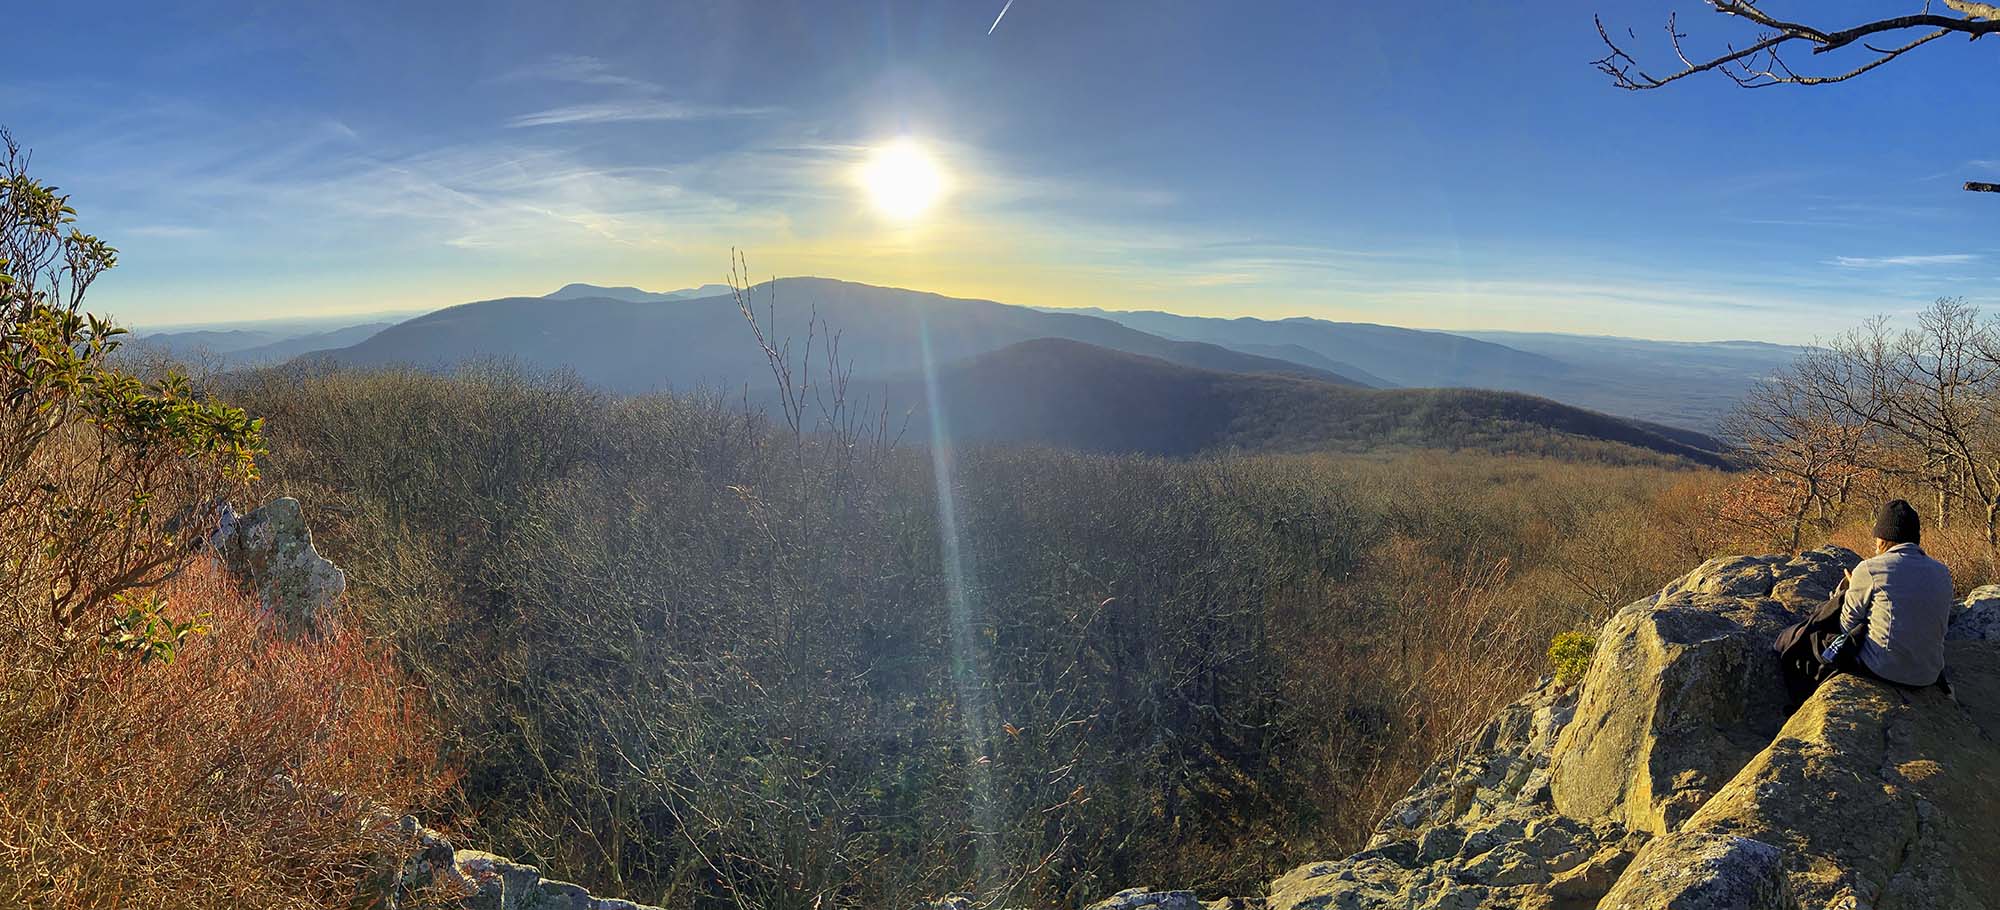 View from Humpback rock as the sun peaks over the Blue Ridge Mountains